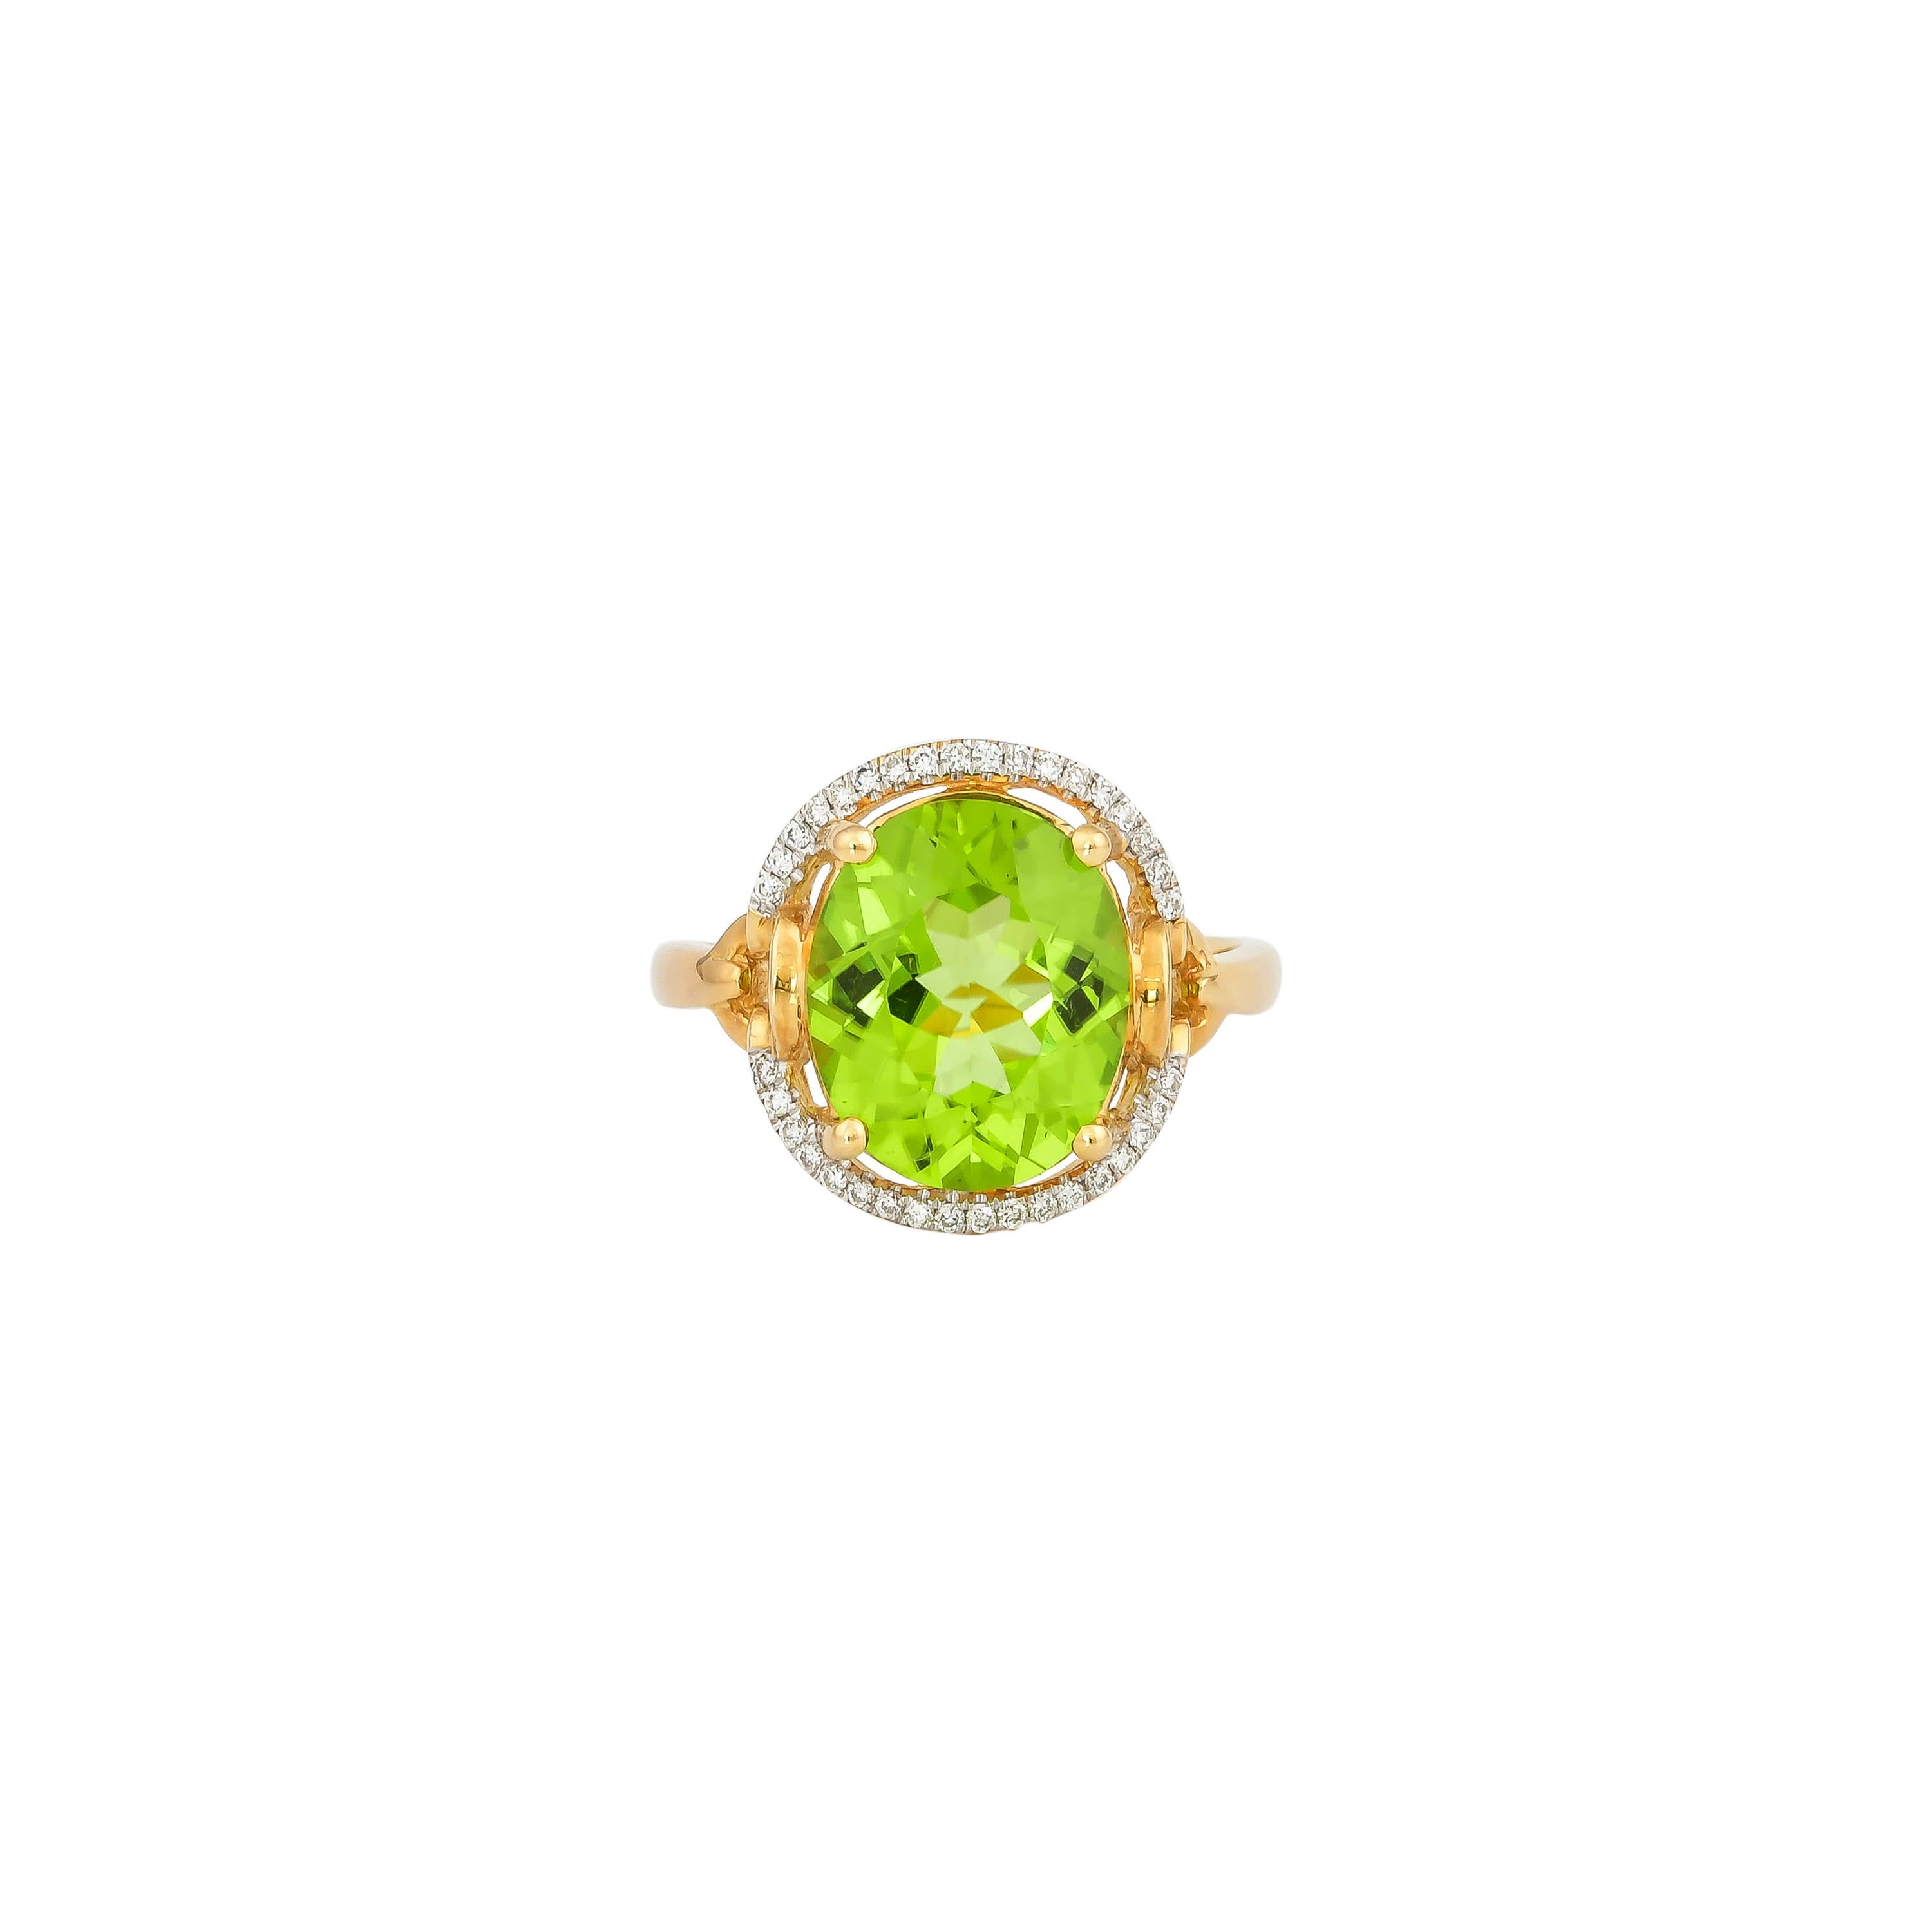 Contemporary 4.4 Carat Peridot and Diamond Ring in 18 Karat Yellow Gold For Sale